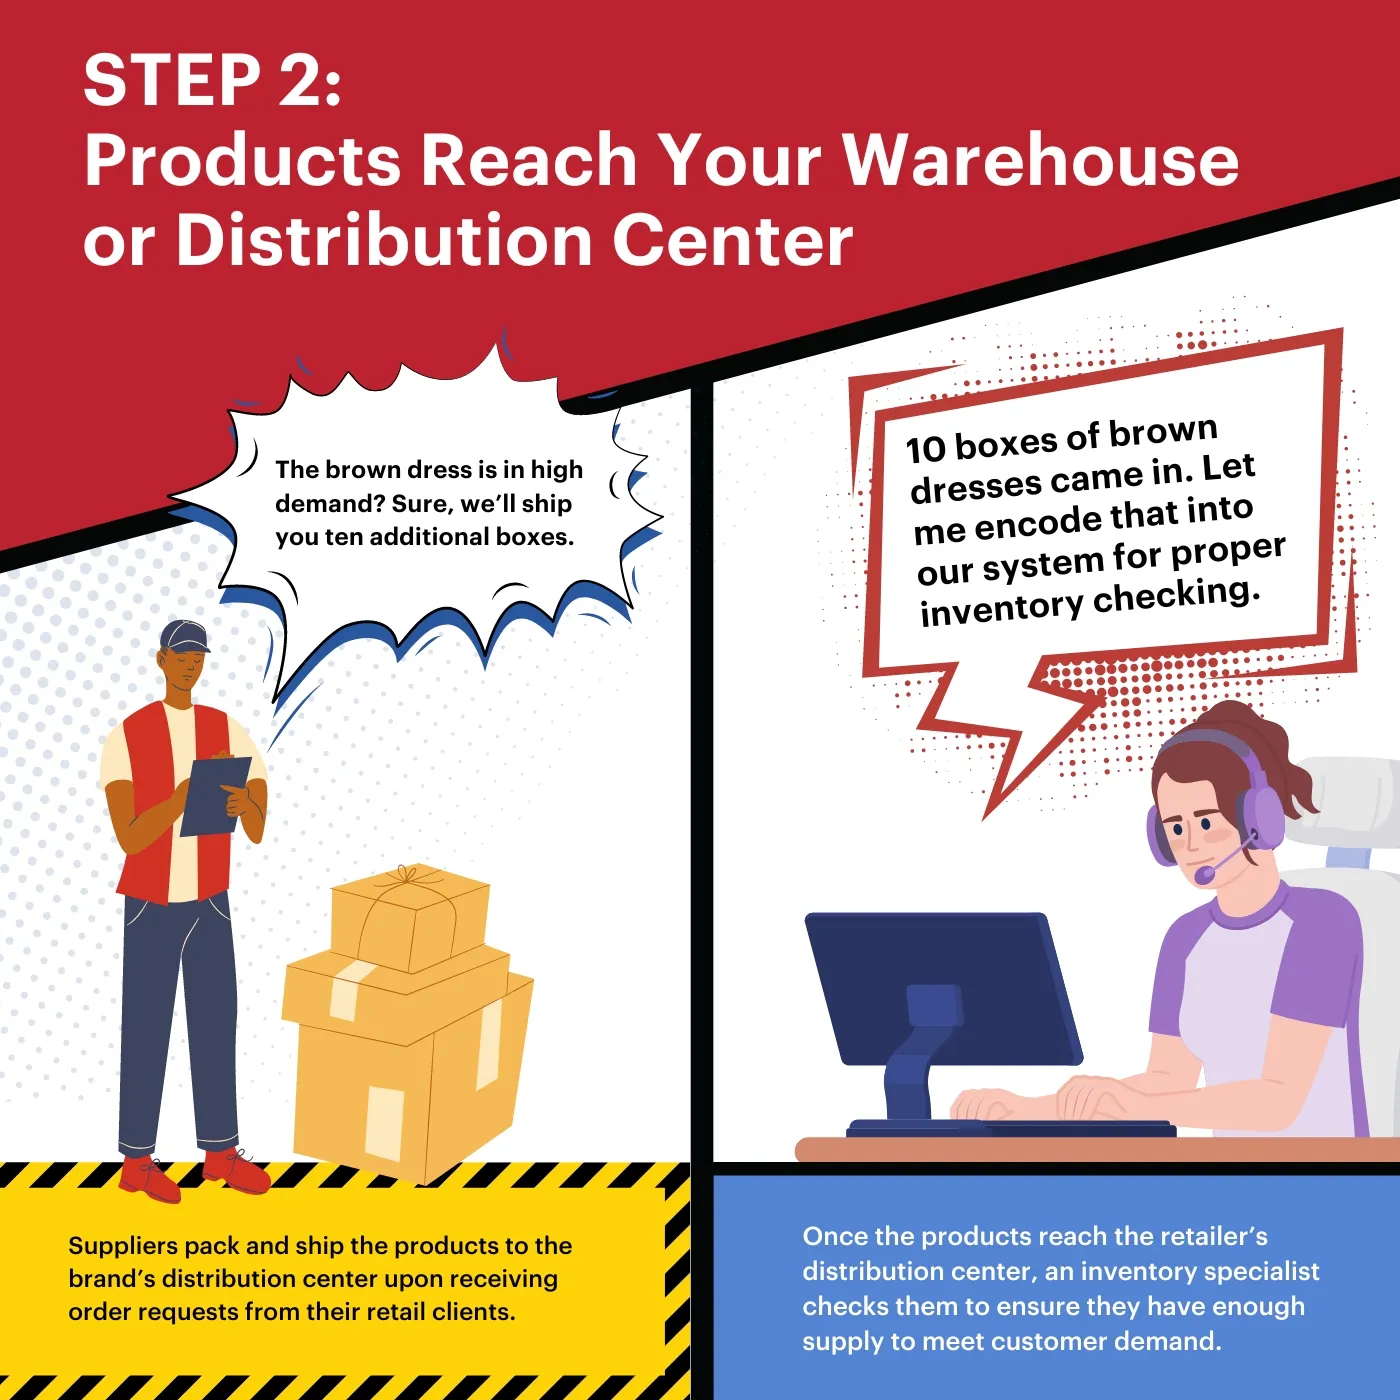 Image caption reads: Products Reach Your Warehouse or Distribution Center.